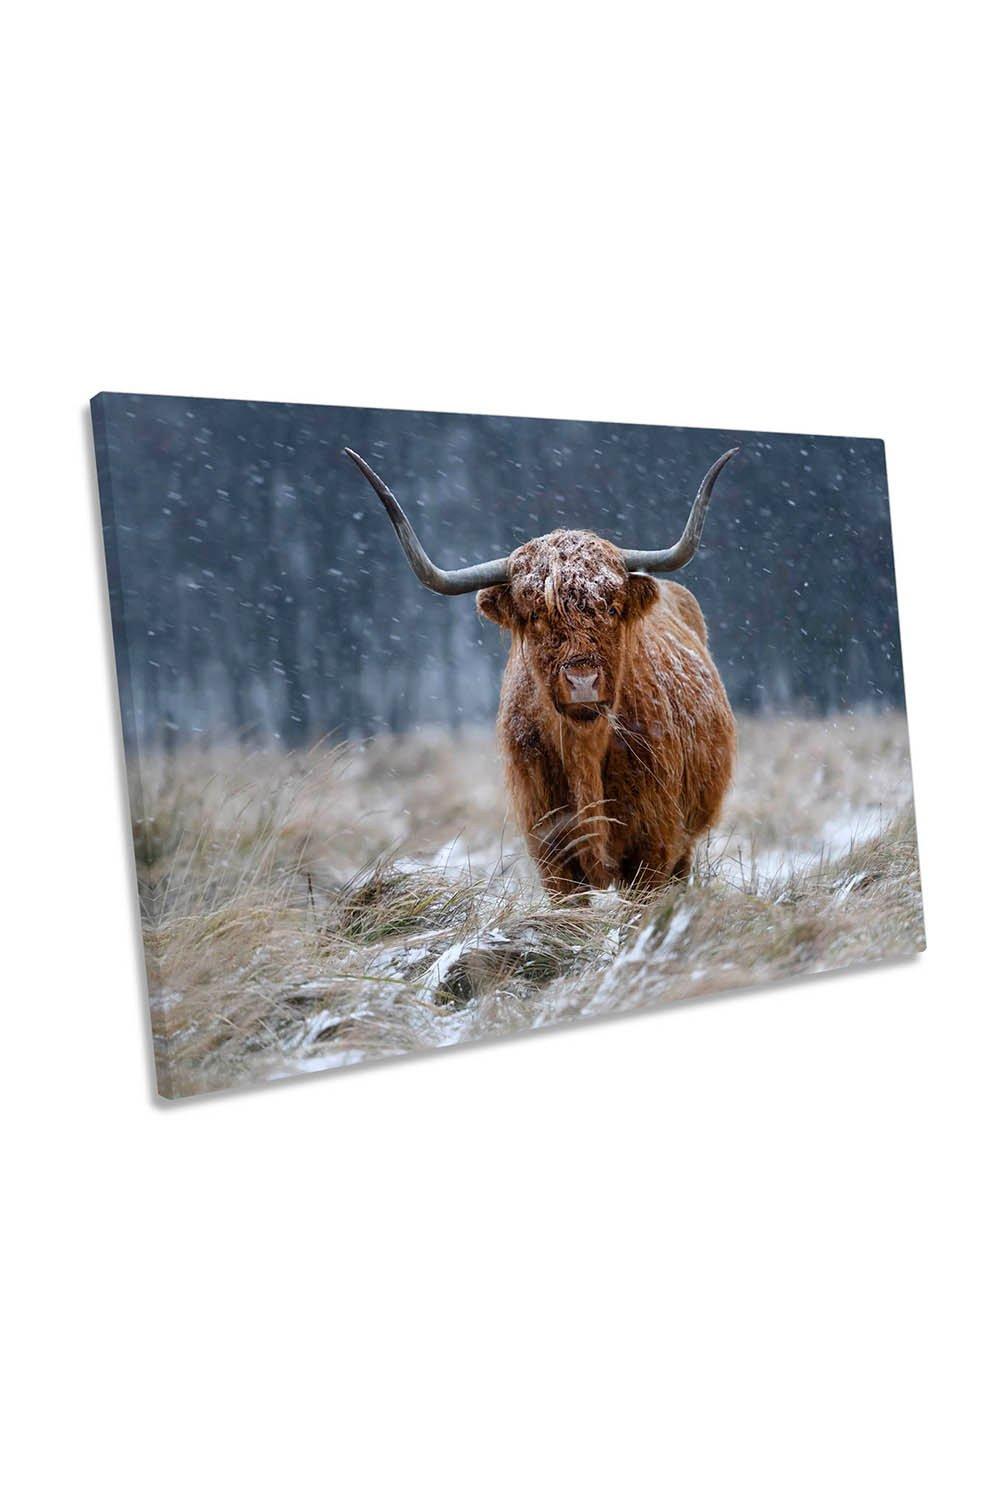 Snowy Highland Cow Scotland Canvas Wall Art Picture Print